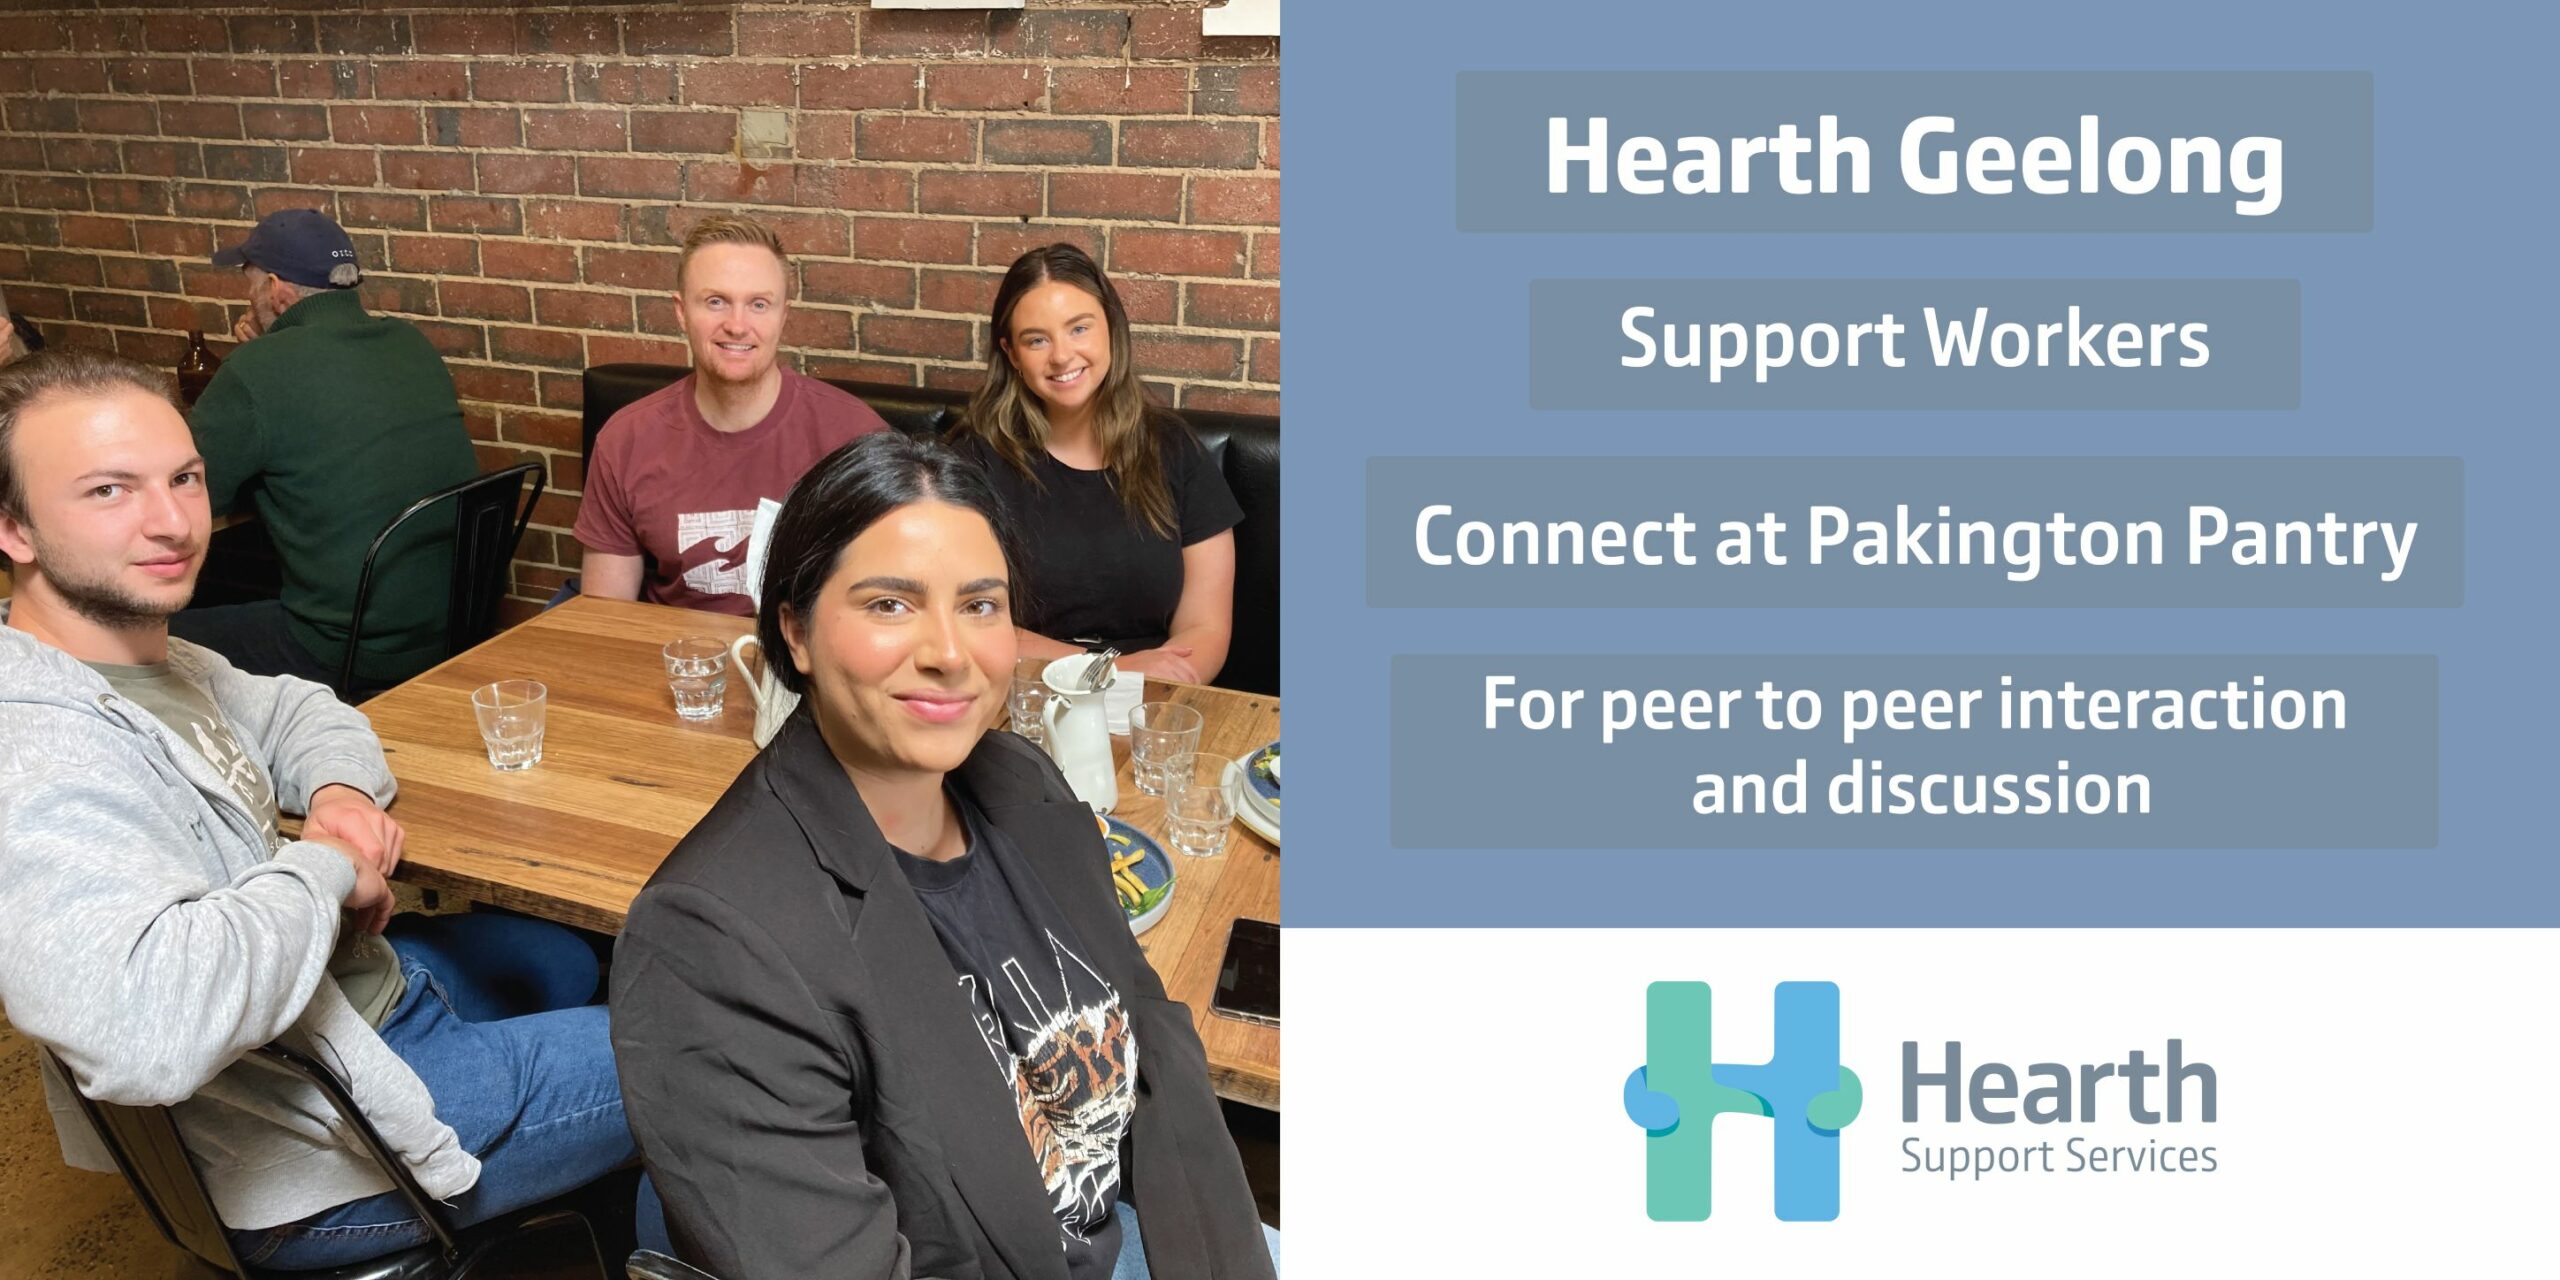 Hearth Support Services Geelong Holds December “Support Worker Connect Meeting” at Pakington Pantry